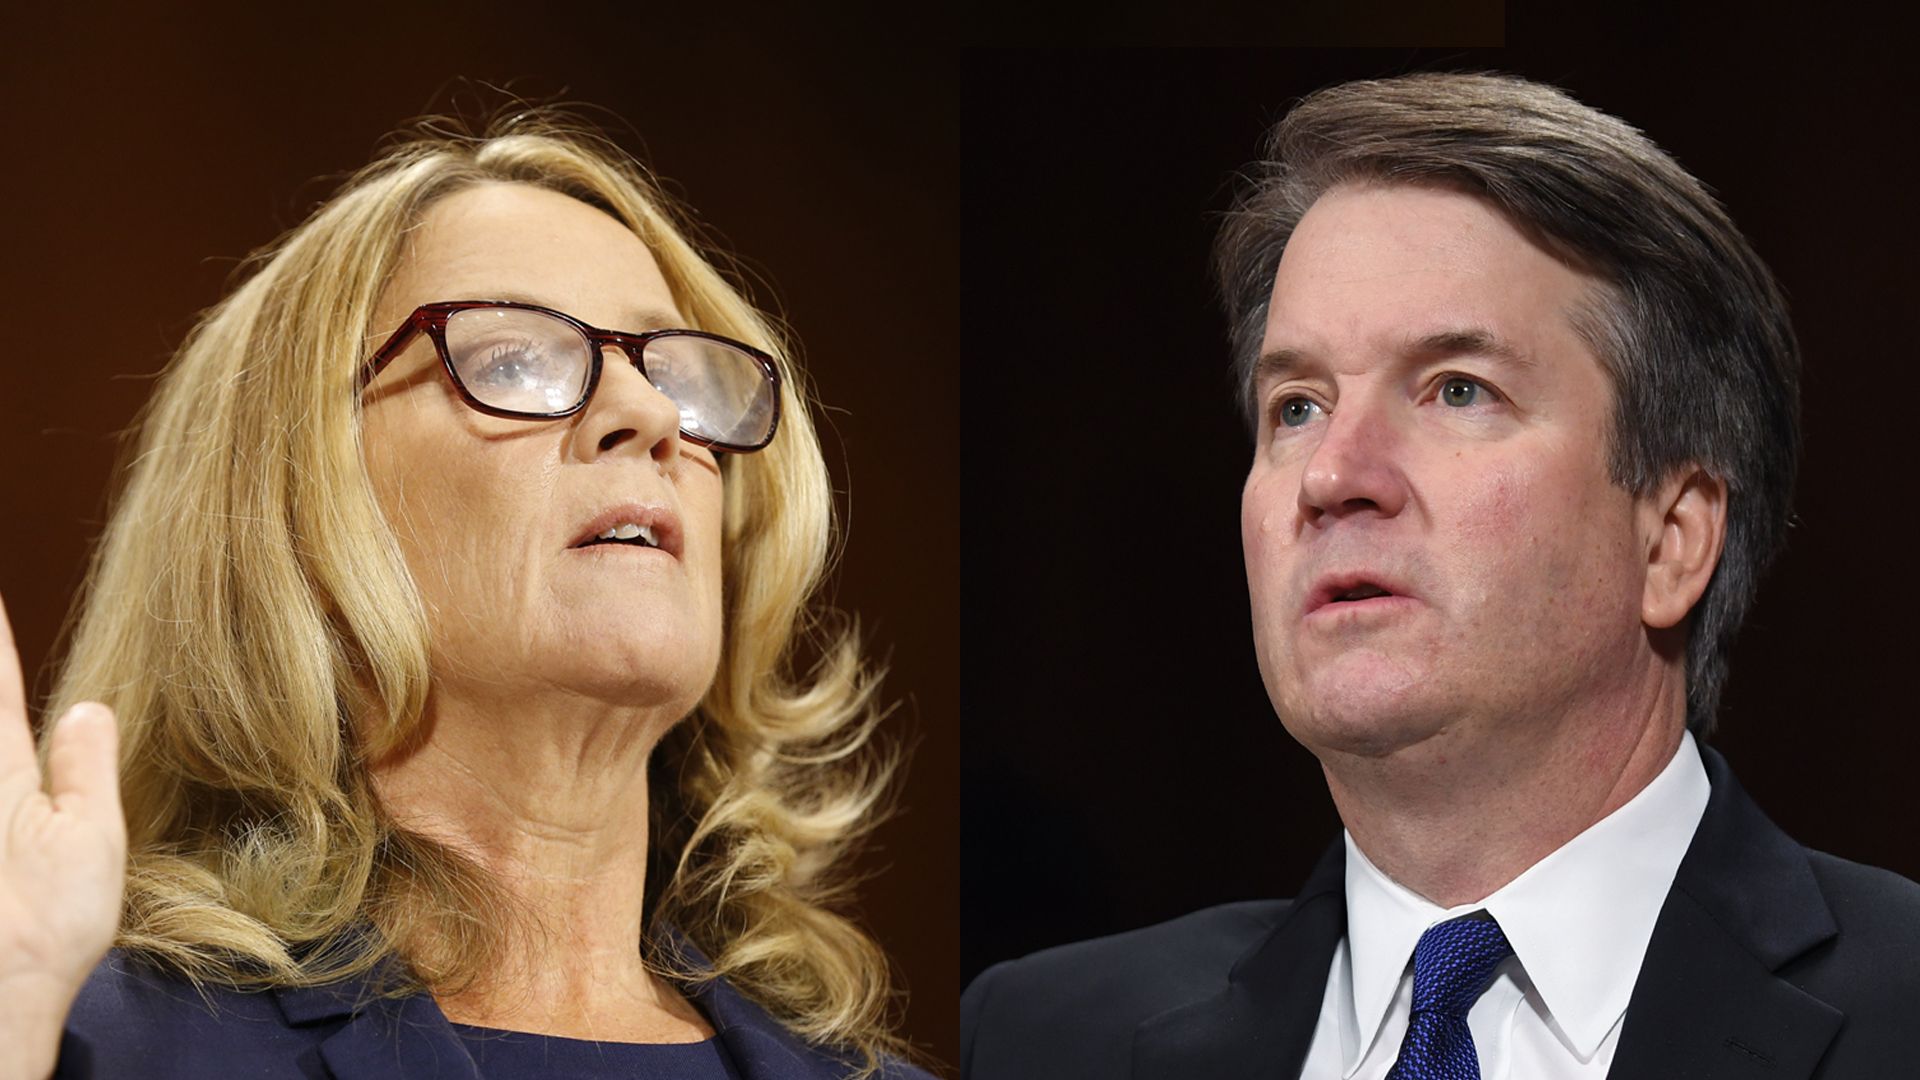 A split image of Christine Blasey Ford raising her hand to swear under oath and Brett Kavanaugh speaking with a serious expression